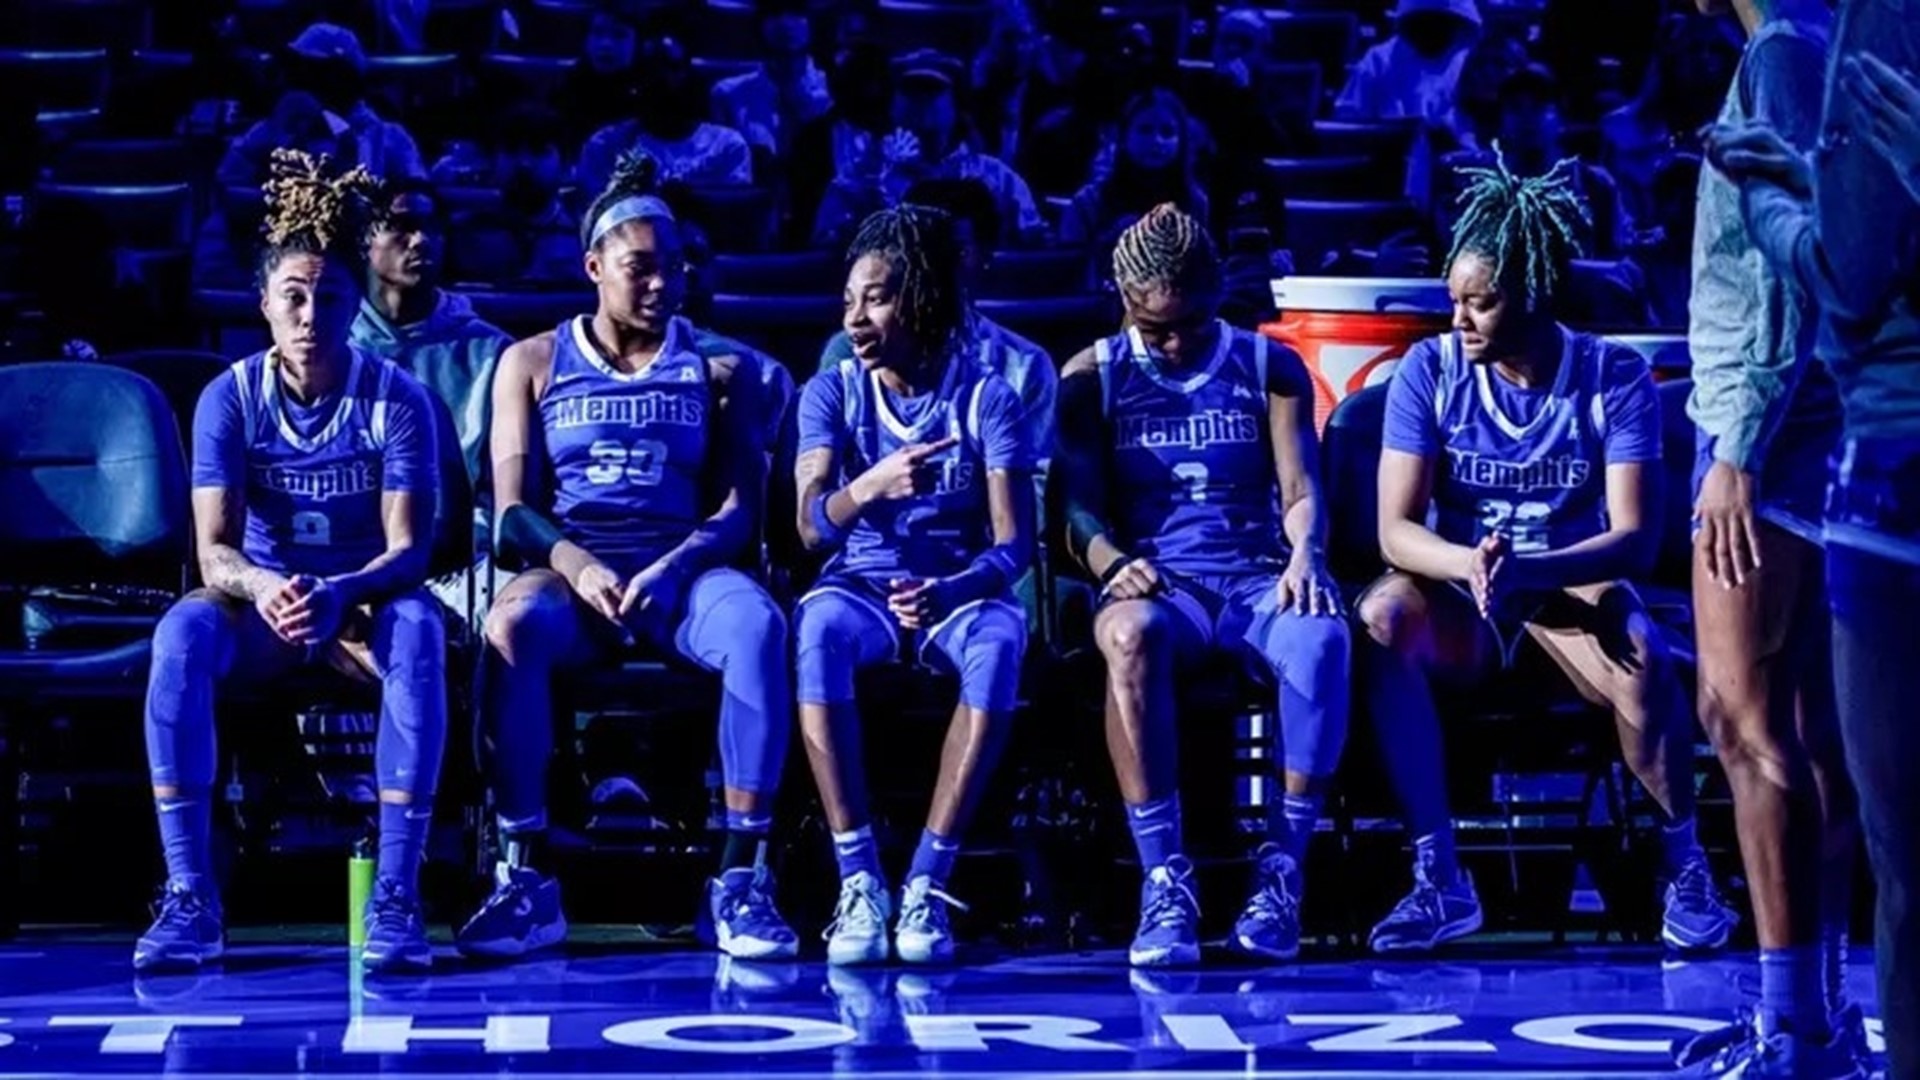 The Memphis Women's Basketball team are primed to put the American Athletic Conference on notice in the tournament.